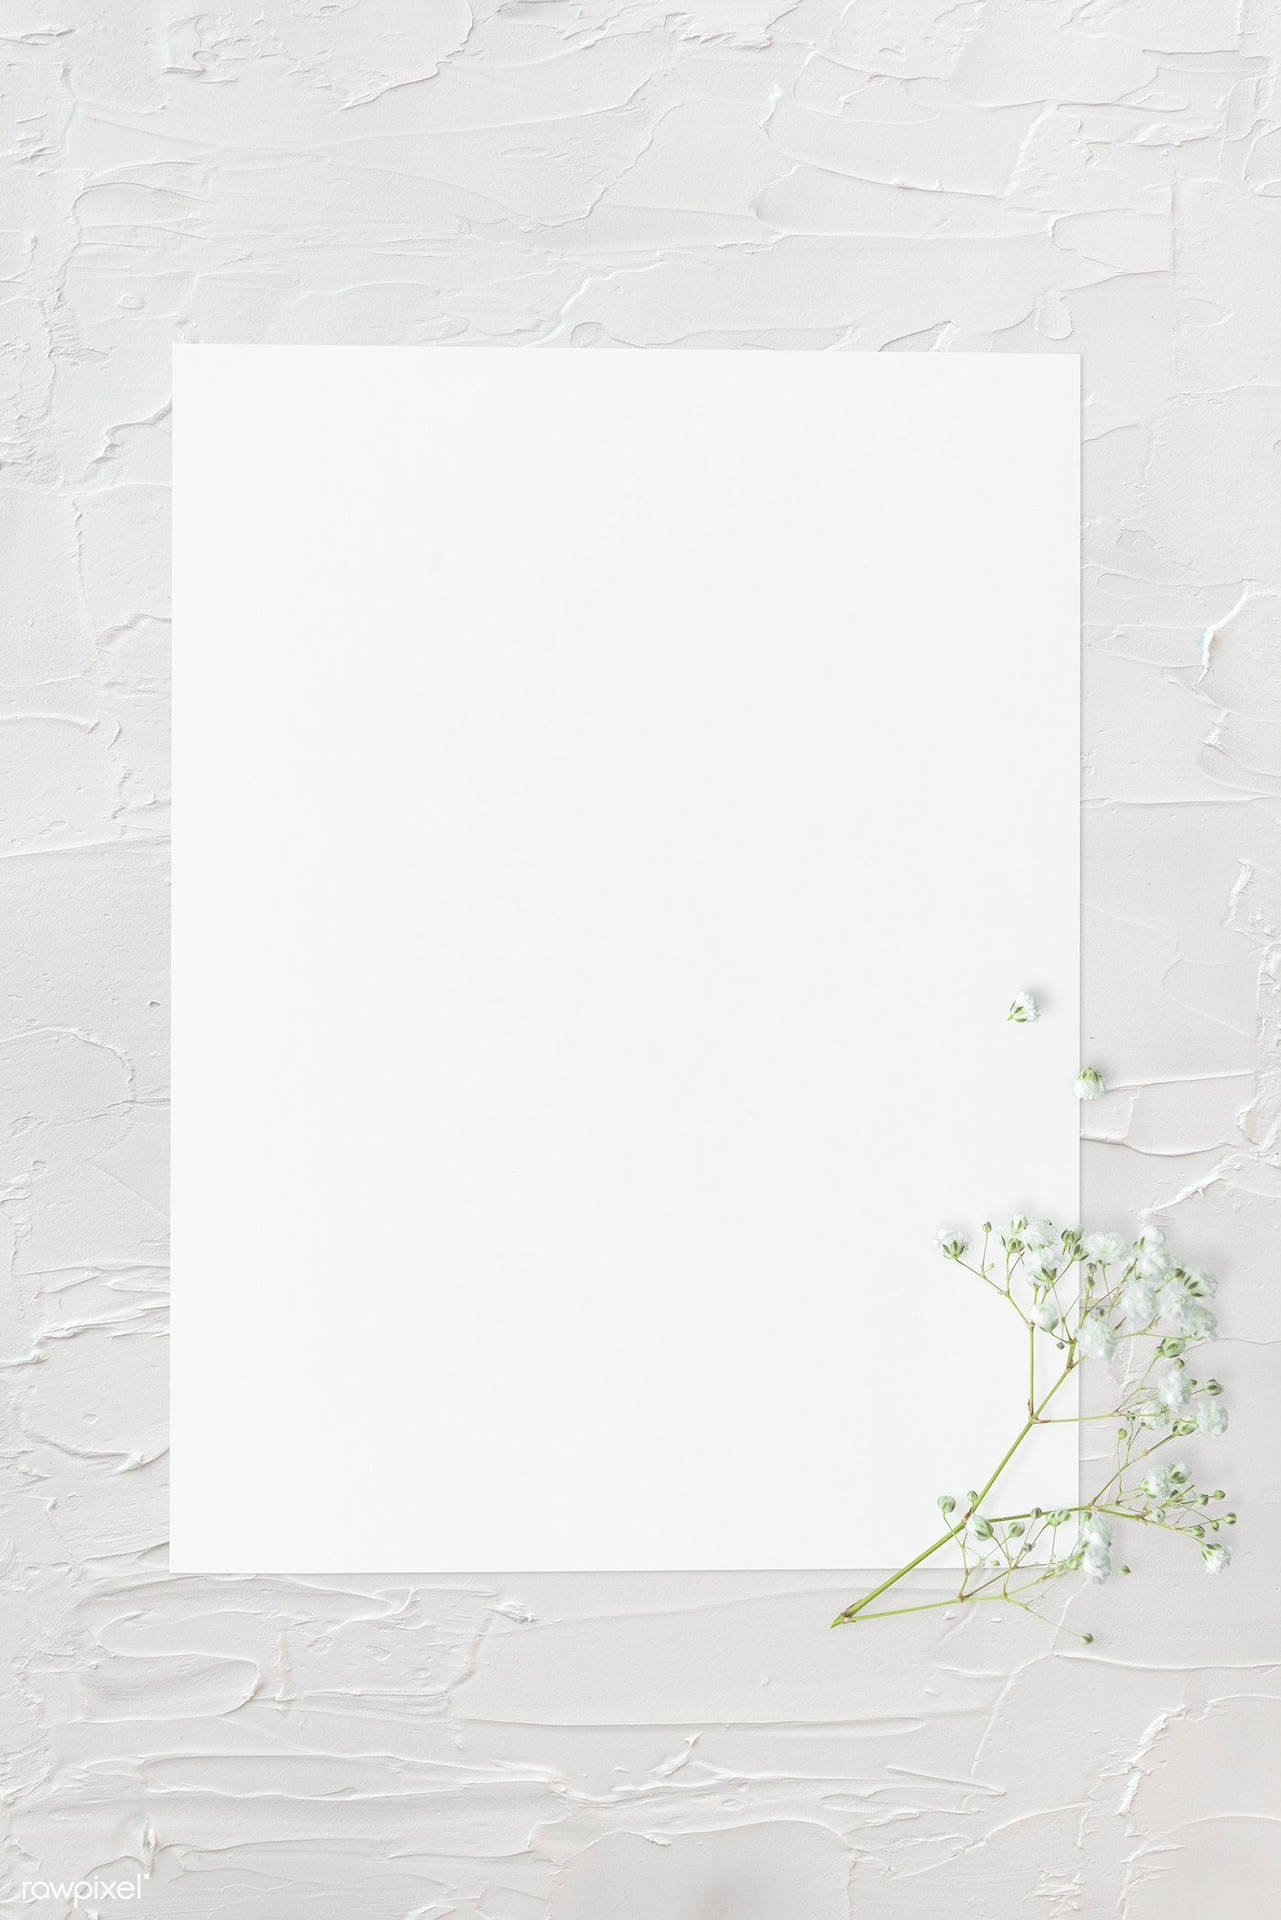 Blank White With Frame And White Flowers Background